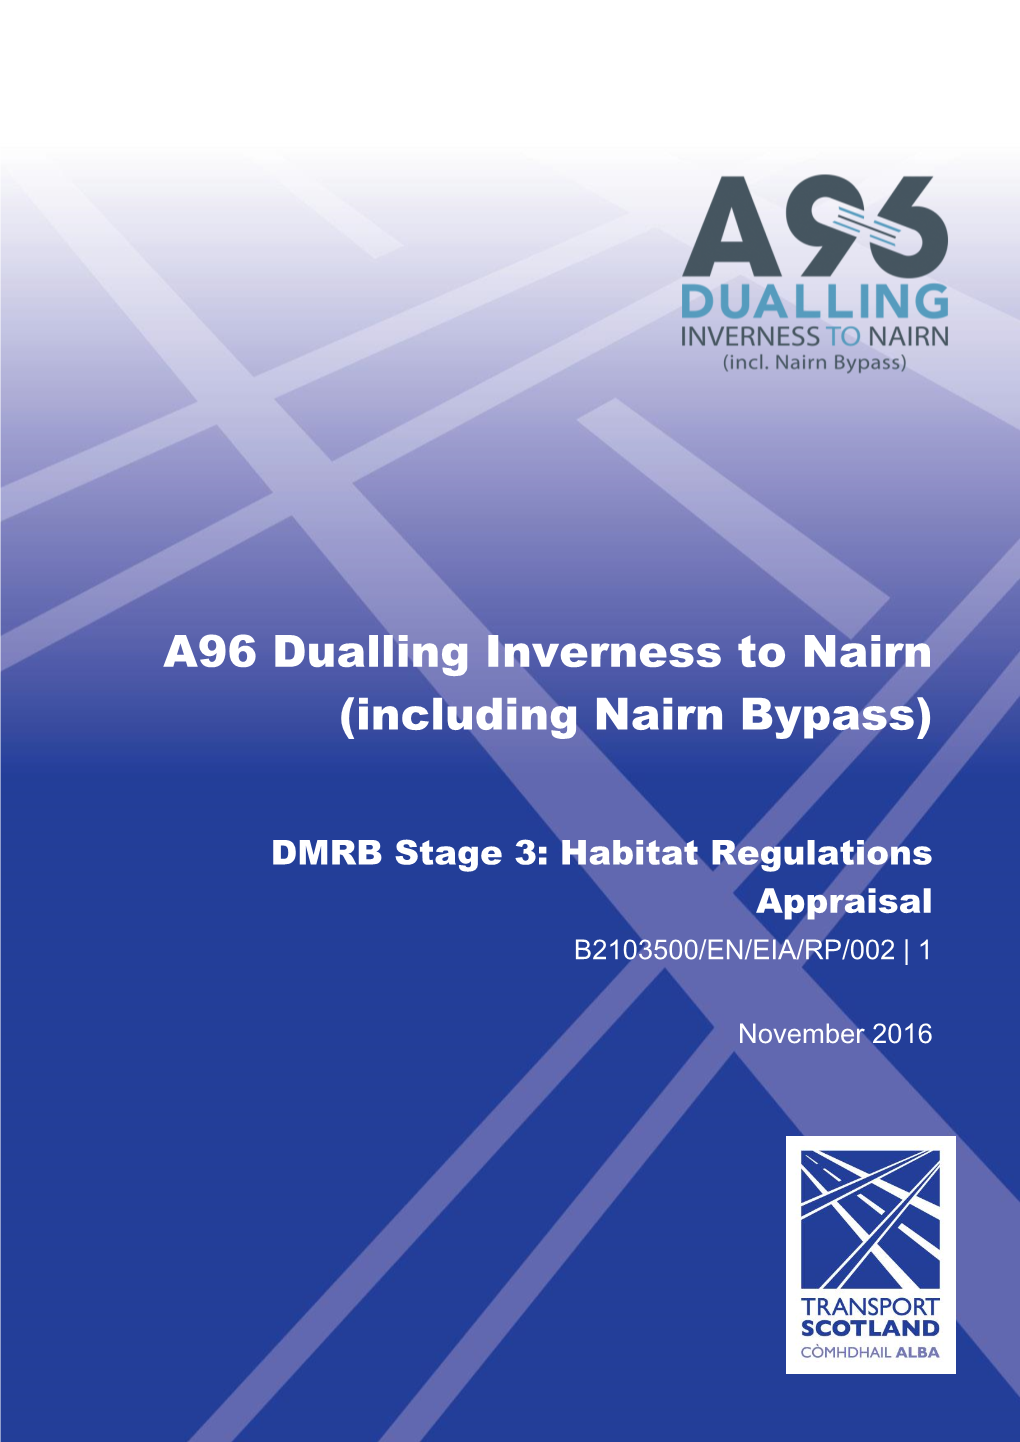 A96 Dualling Inverness to Nairn (Including Nairn Bypass) DMRB Stage 3 Habitats Regulations Appraisal